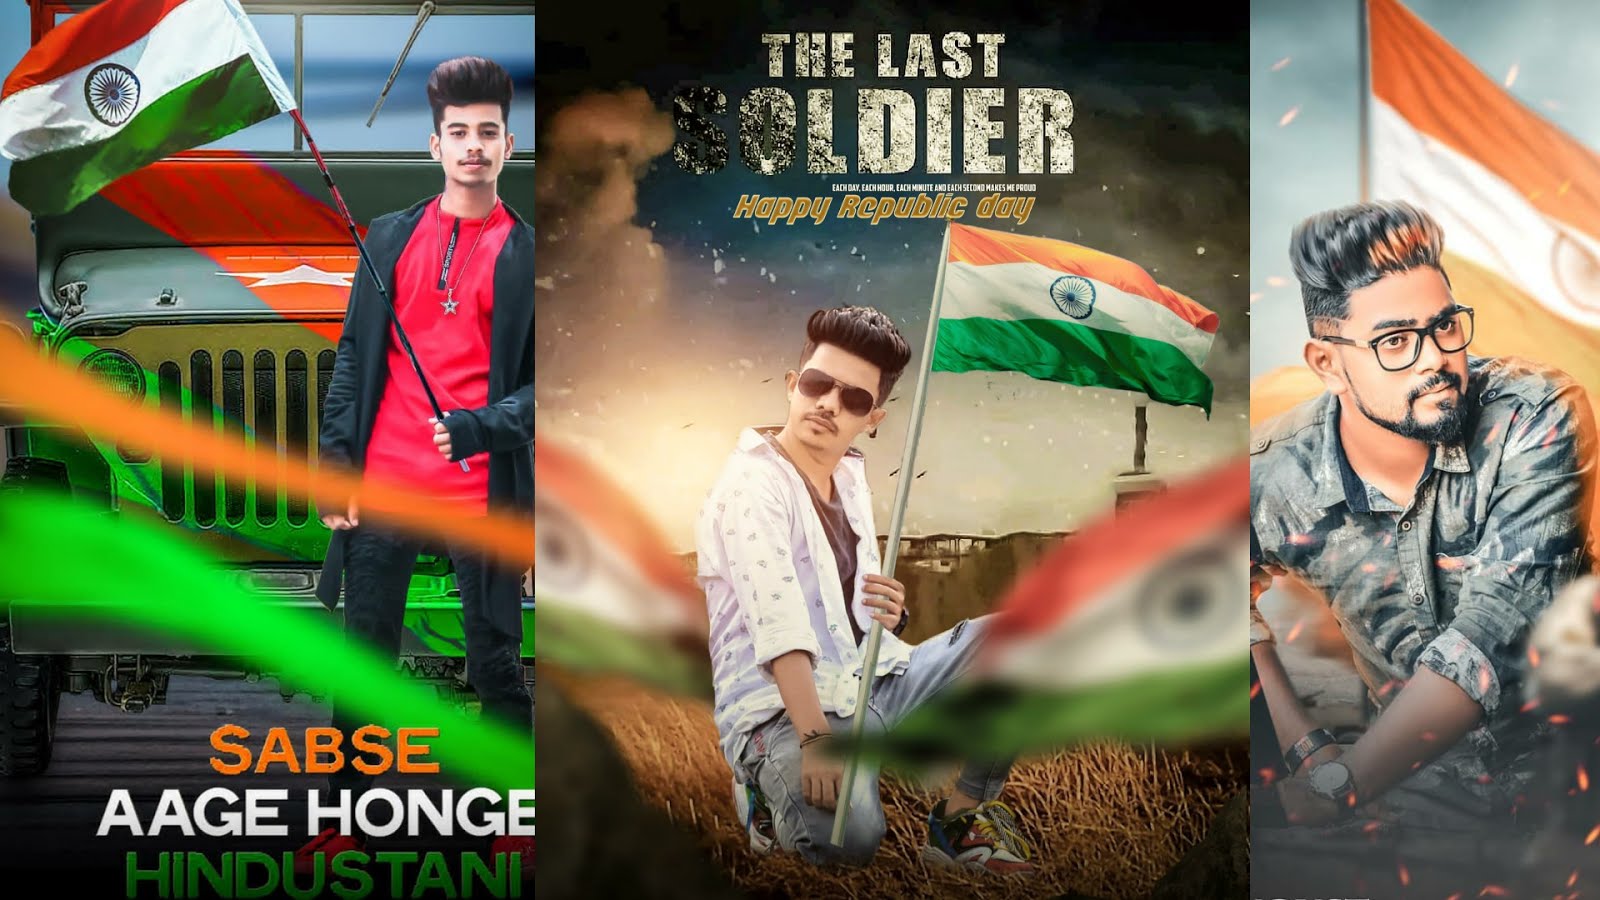 26 january photo editing picsart hindi tutorial, happy republic day photo  editing background png download - LEARNINGWITHSR